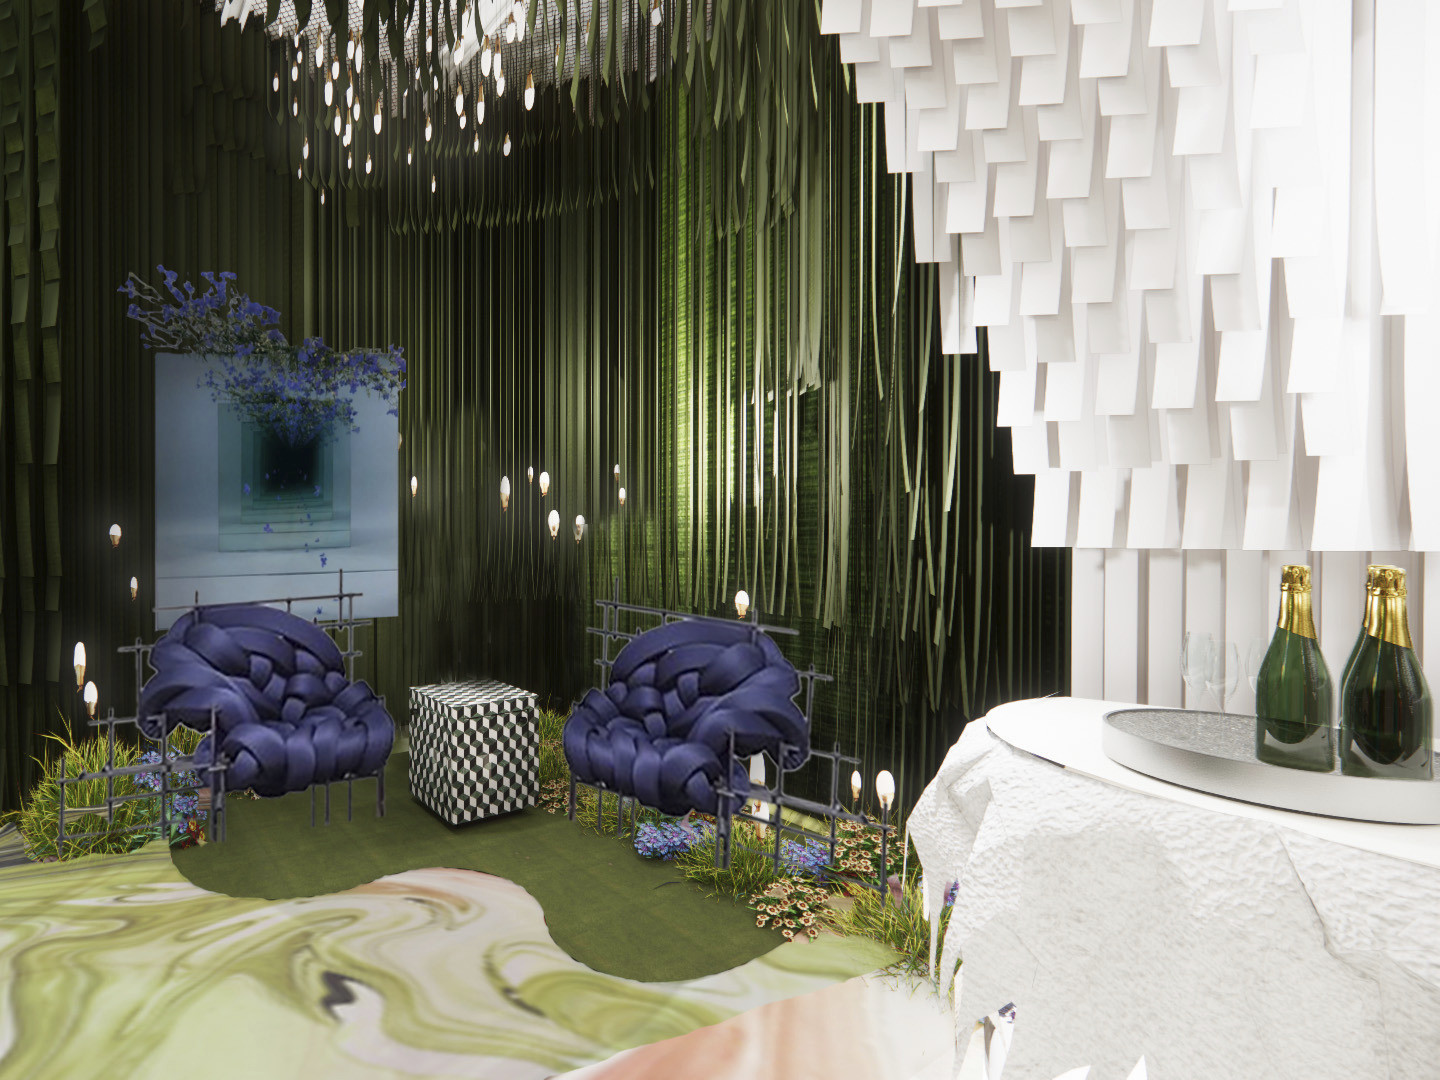 Rendering of installation space for BDNY event from DLR Group. Green textural walls with white and purple accents